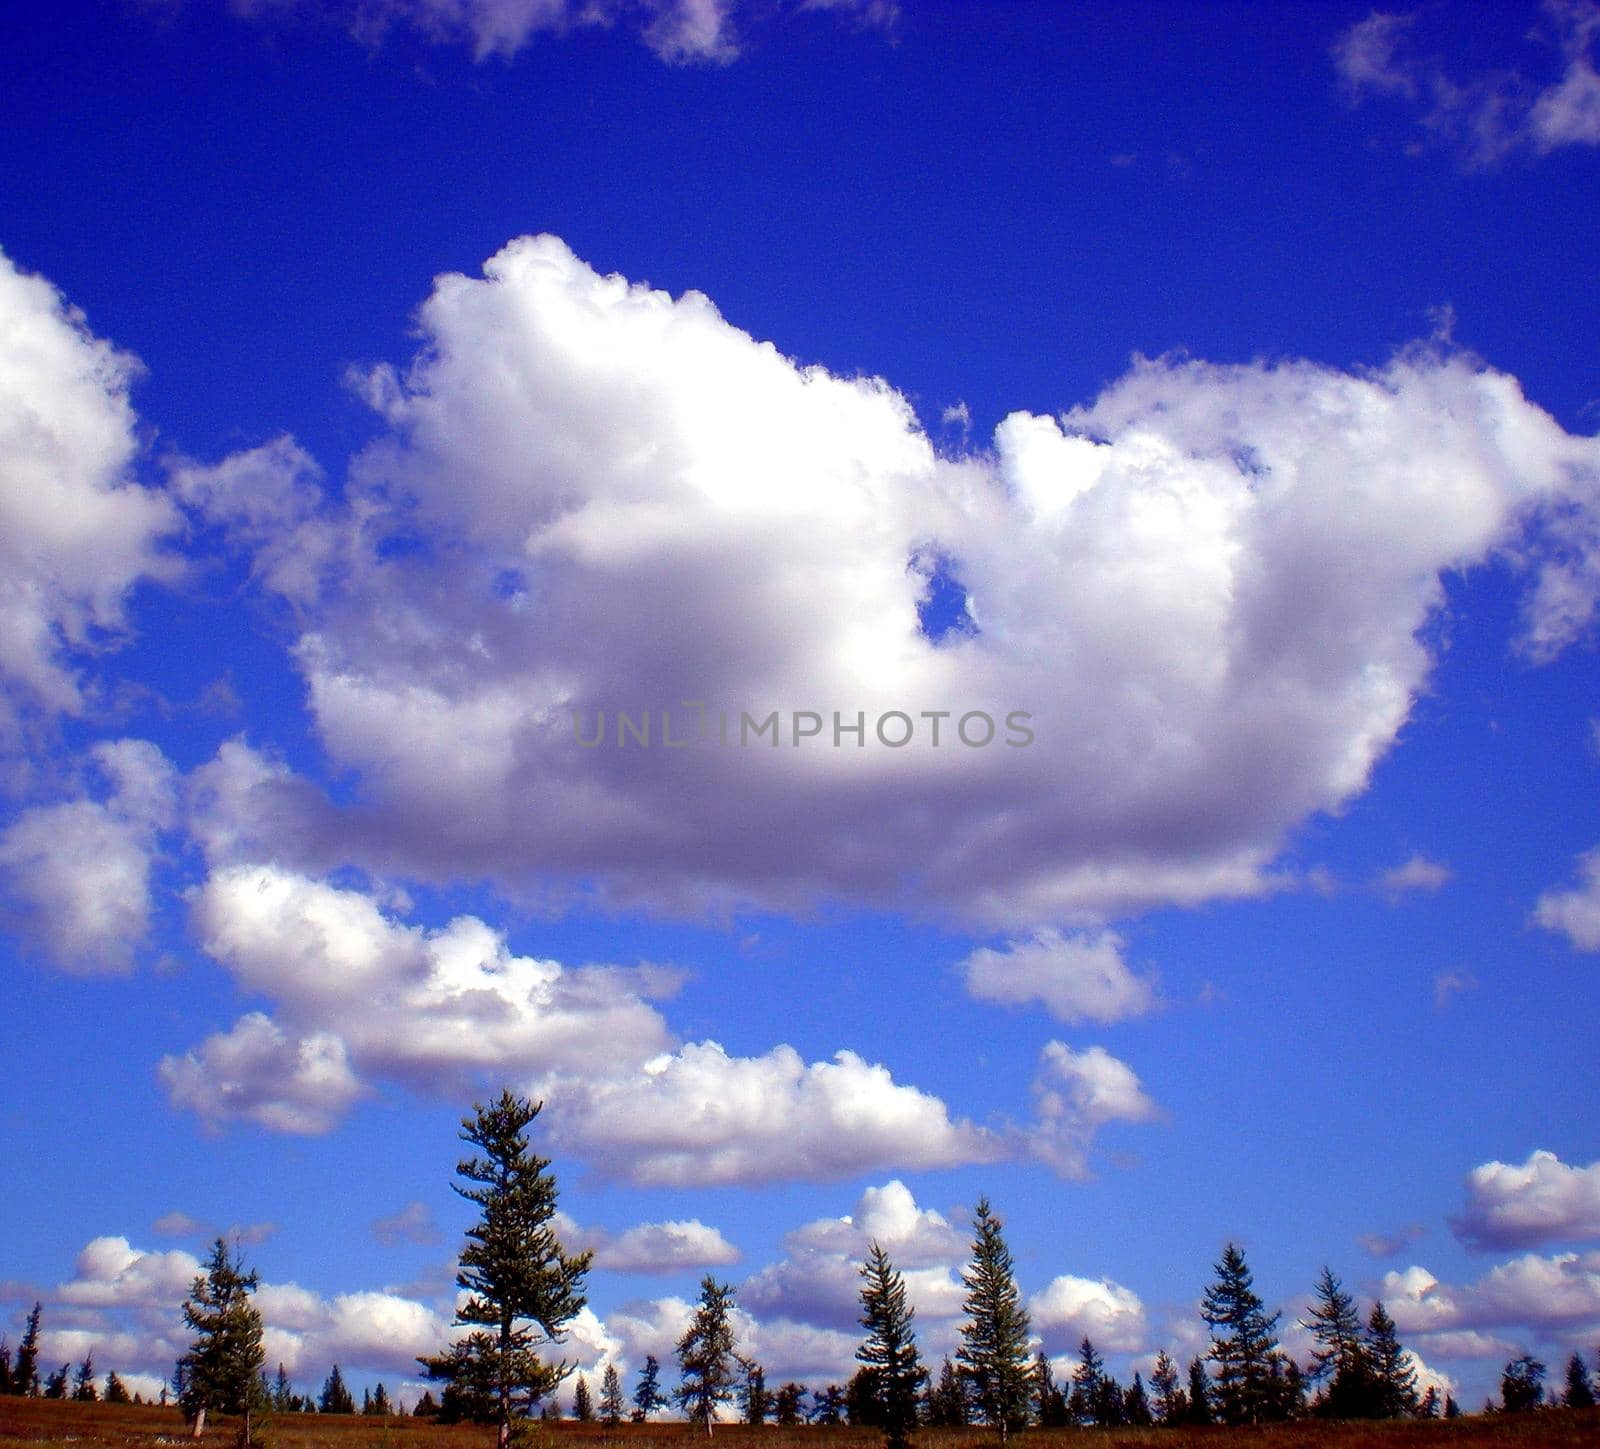 Blue sky with clouds over the taiga. The nature of the Russian north.